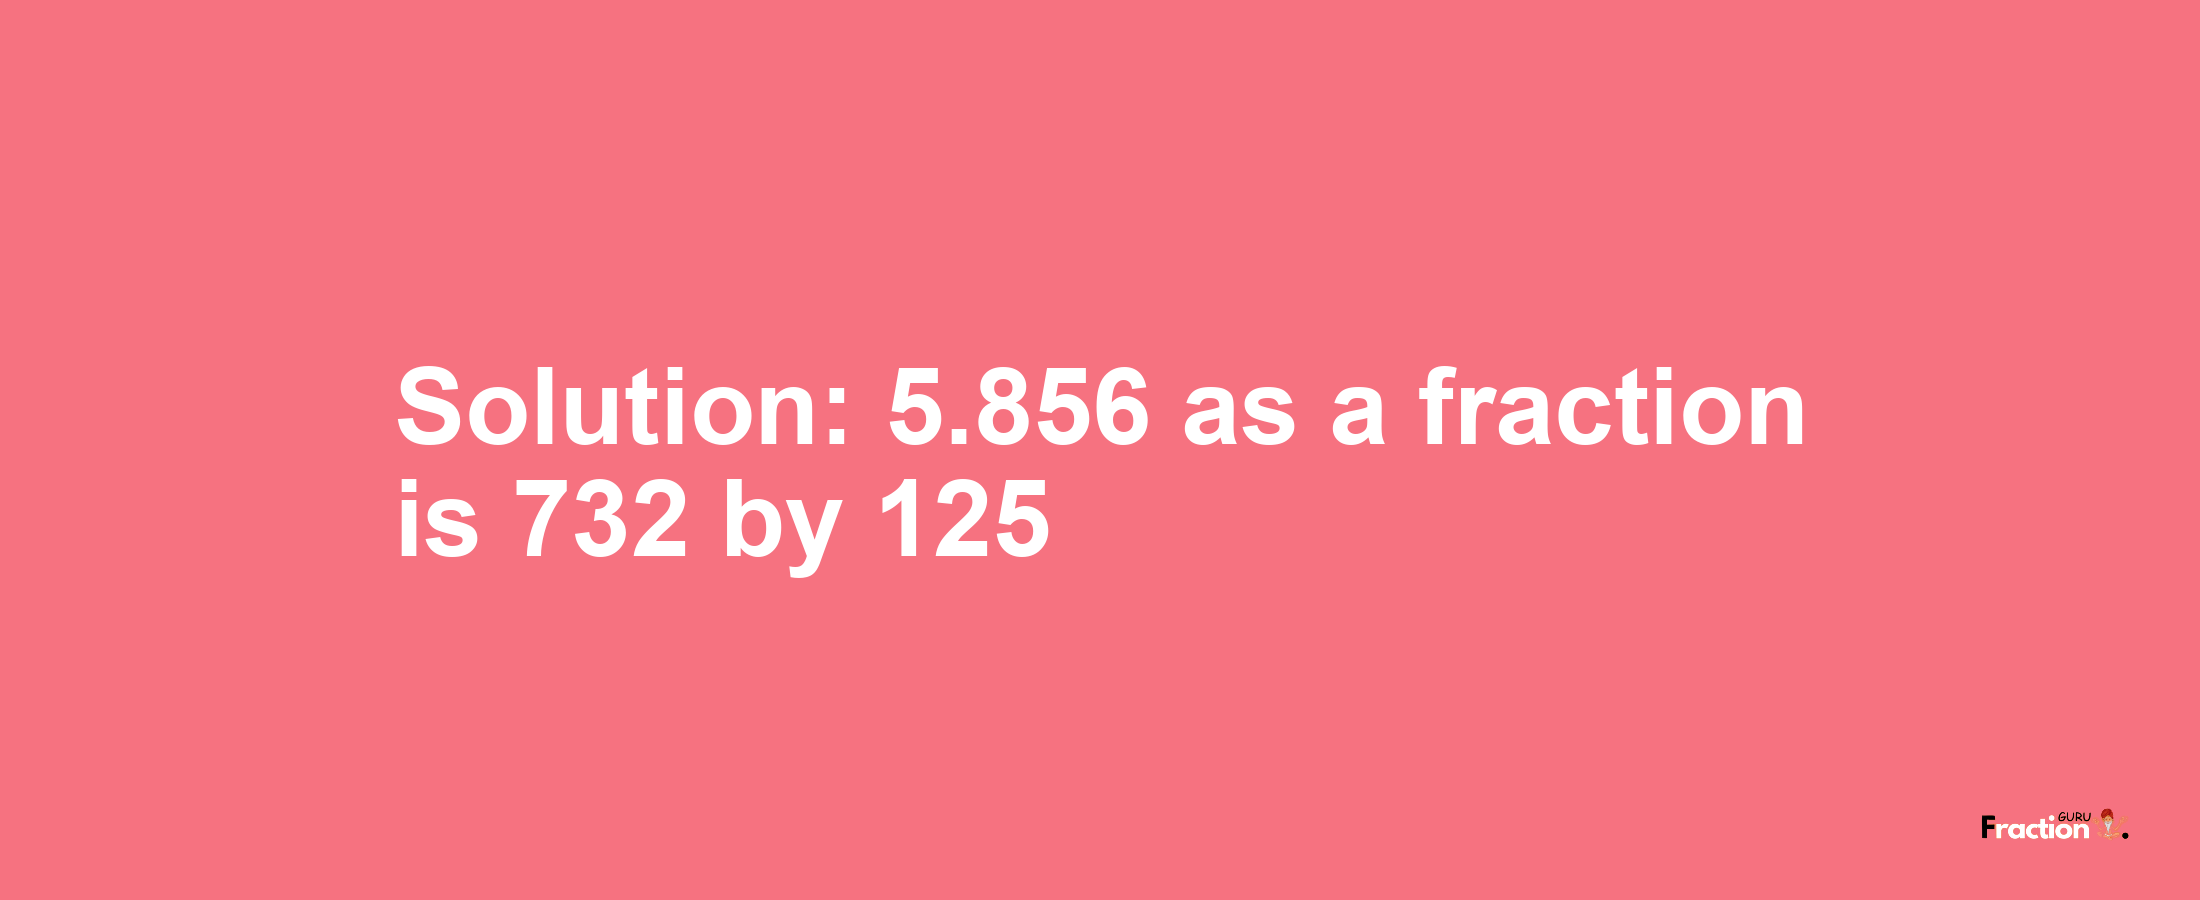 Solution:5.856 as a fraction is 732/125